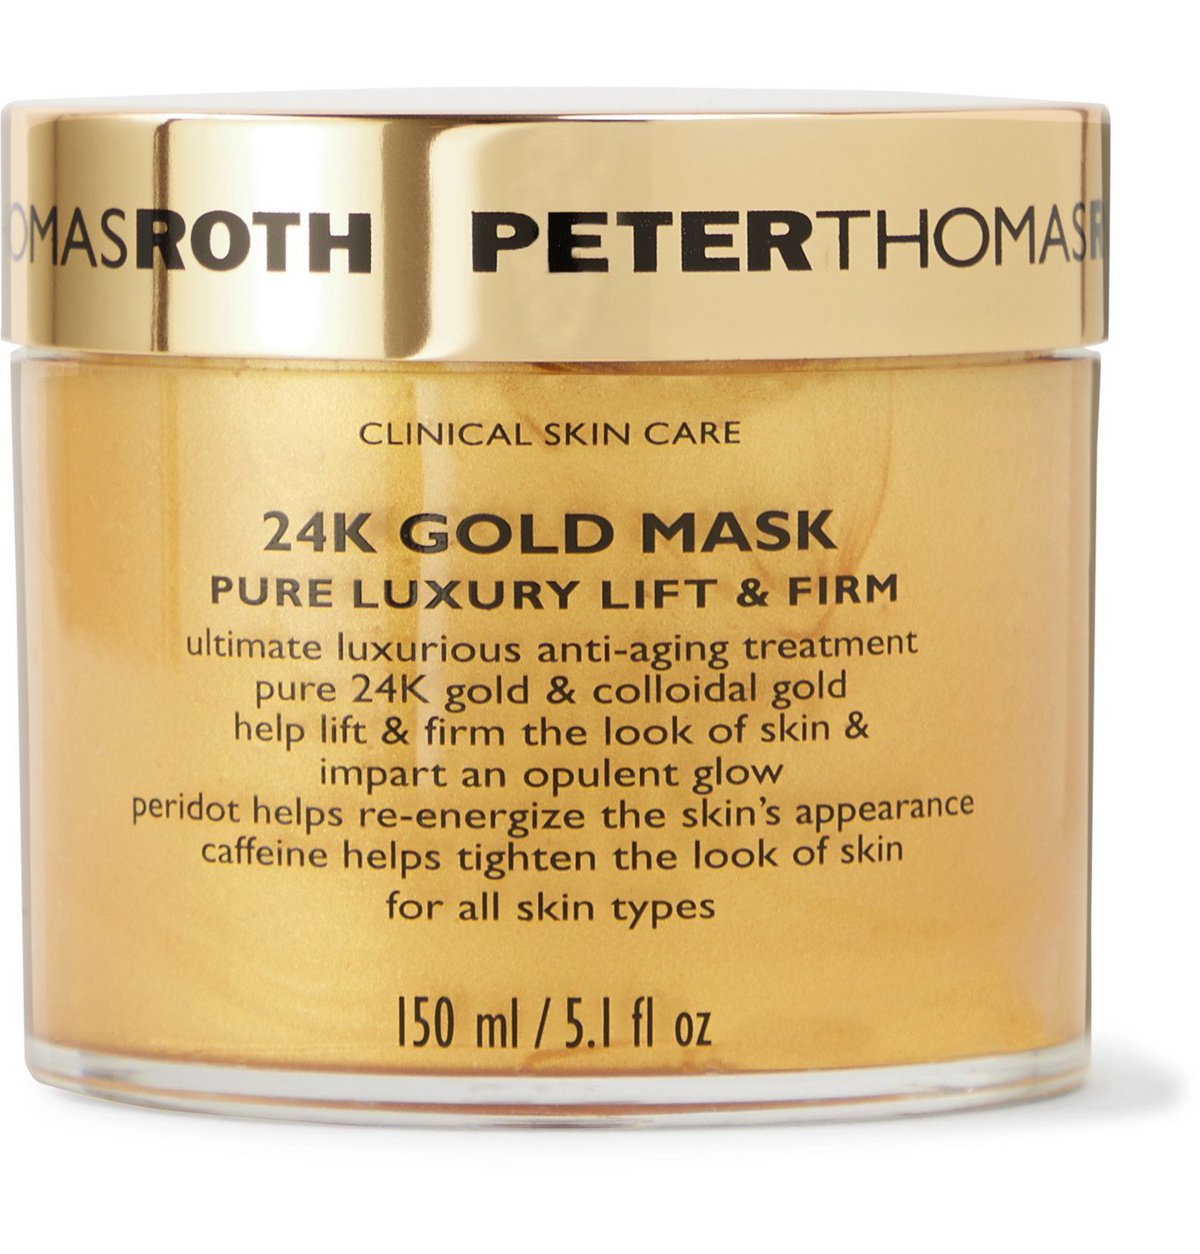 THOMAS ROTH - 24K Gold Mask Luxury Lift & Firm, - Colorless Peter Do